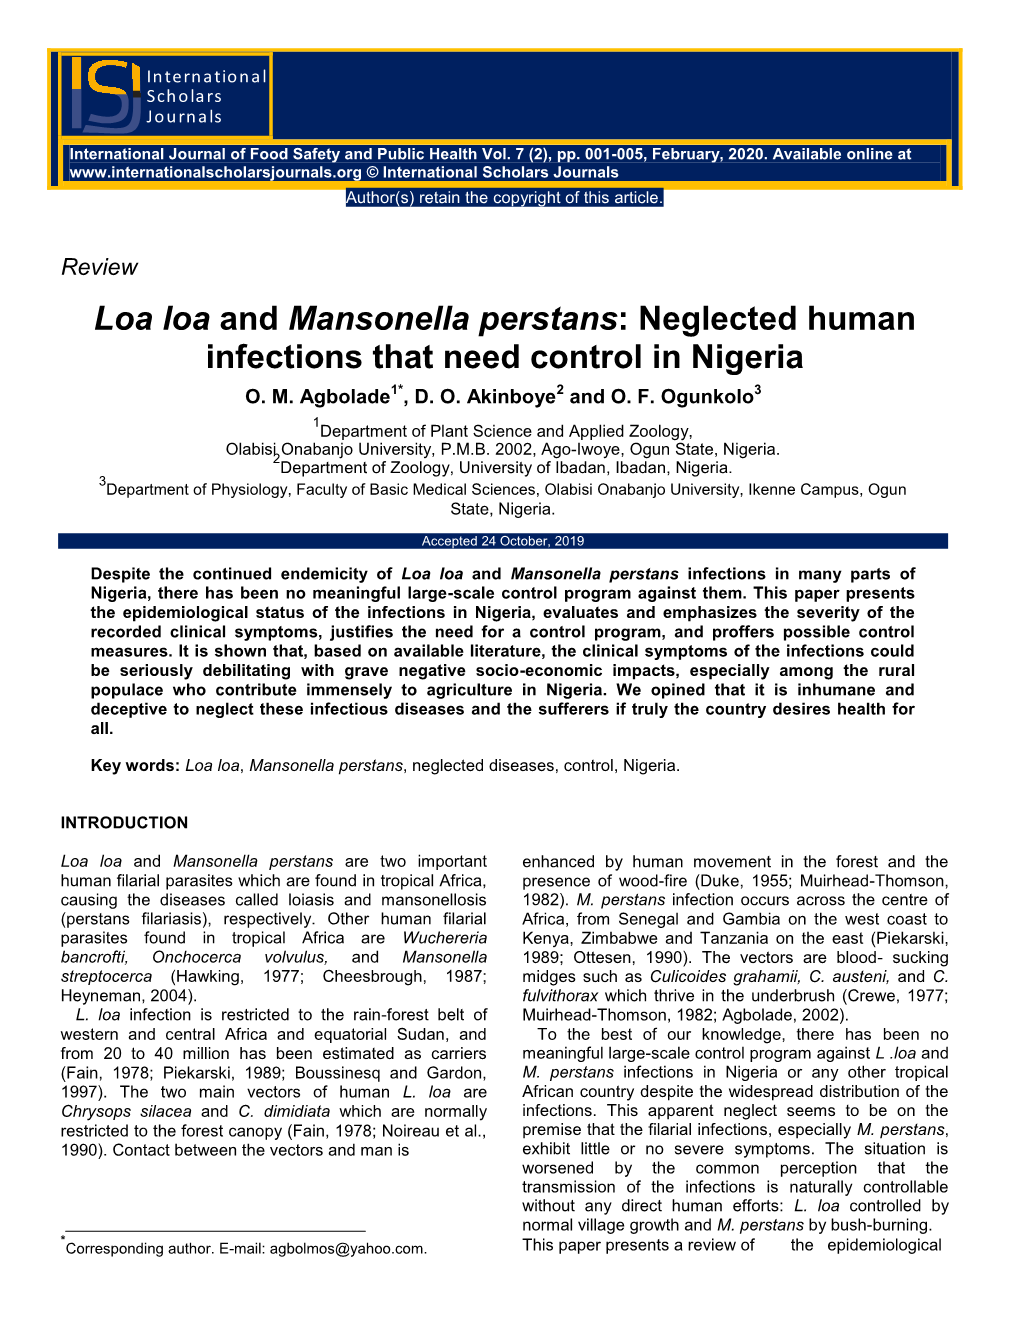 Loa Loa and Mansonella Perstans: Neglected Human Infections That Need Control in Nigeria